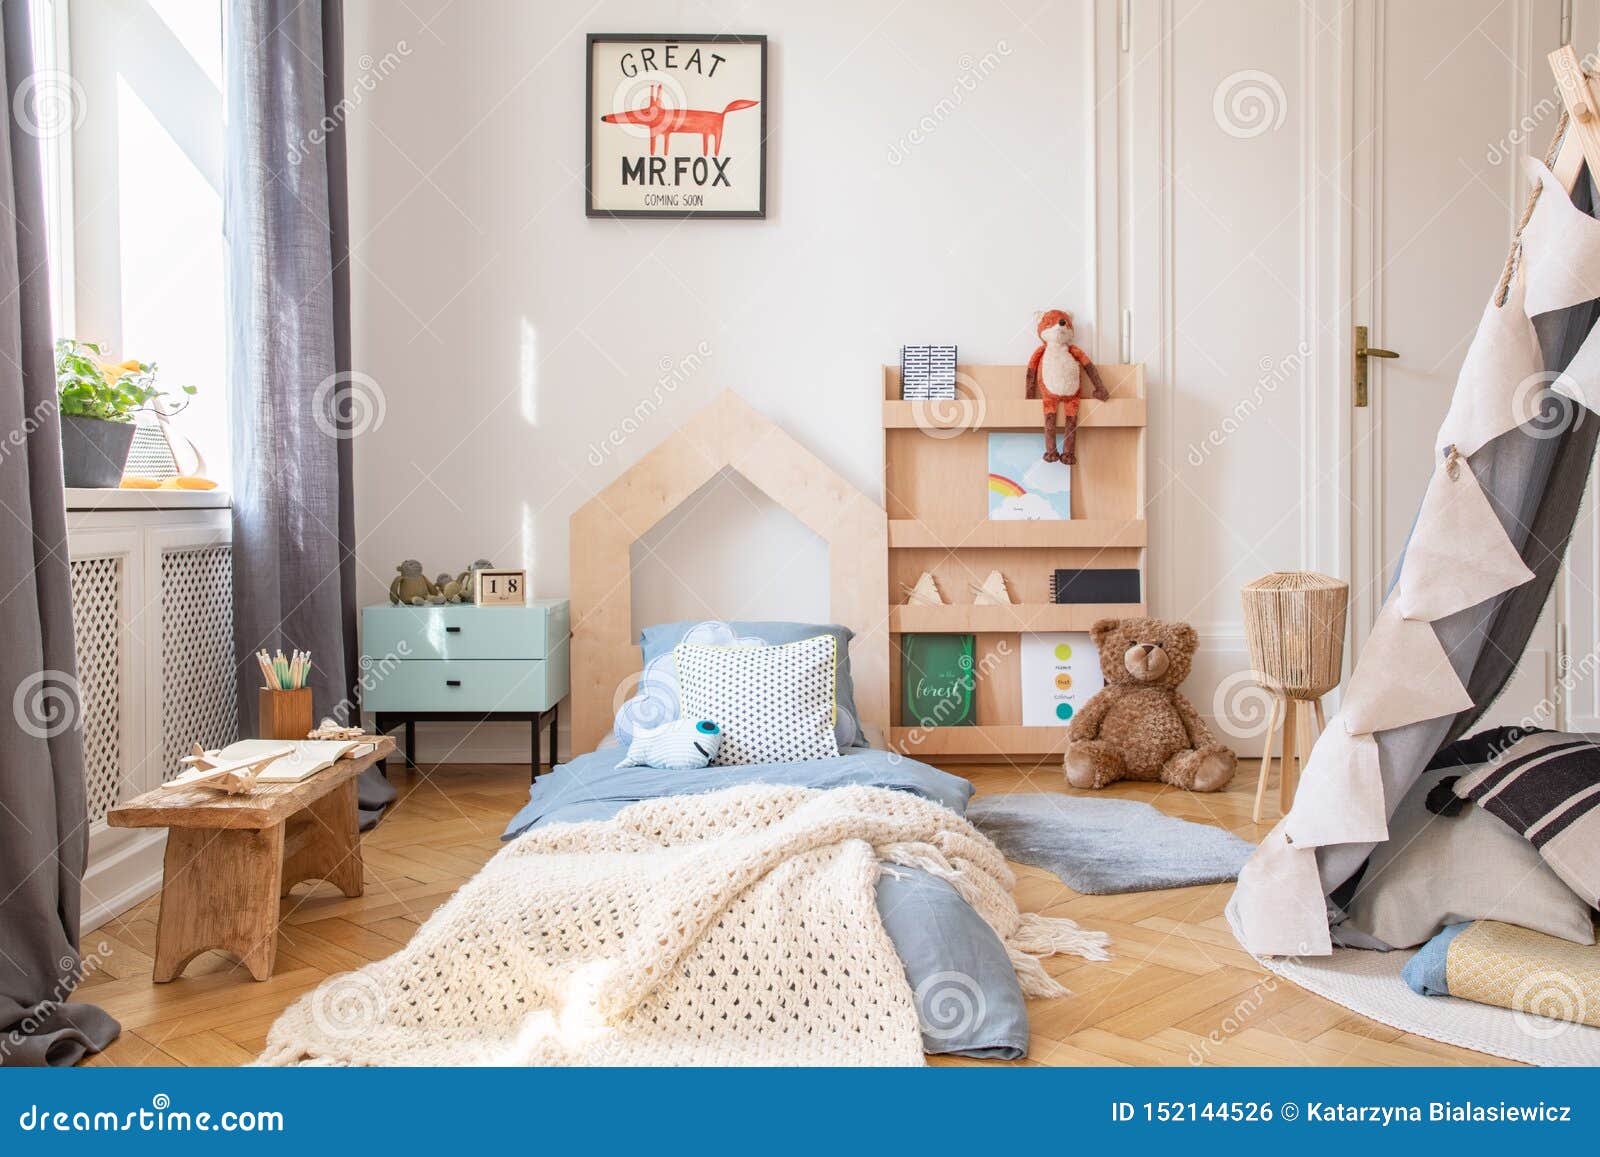 Download 152 Poster Mockup Kids Room Photos Free Royalty Free Stock Photos From Dreamstime